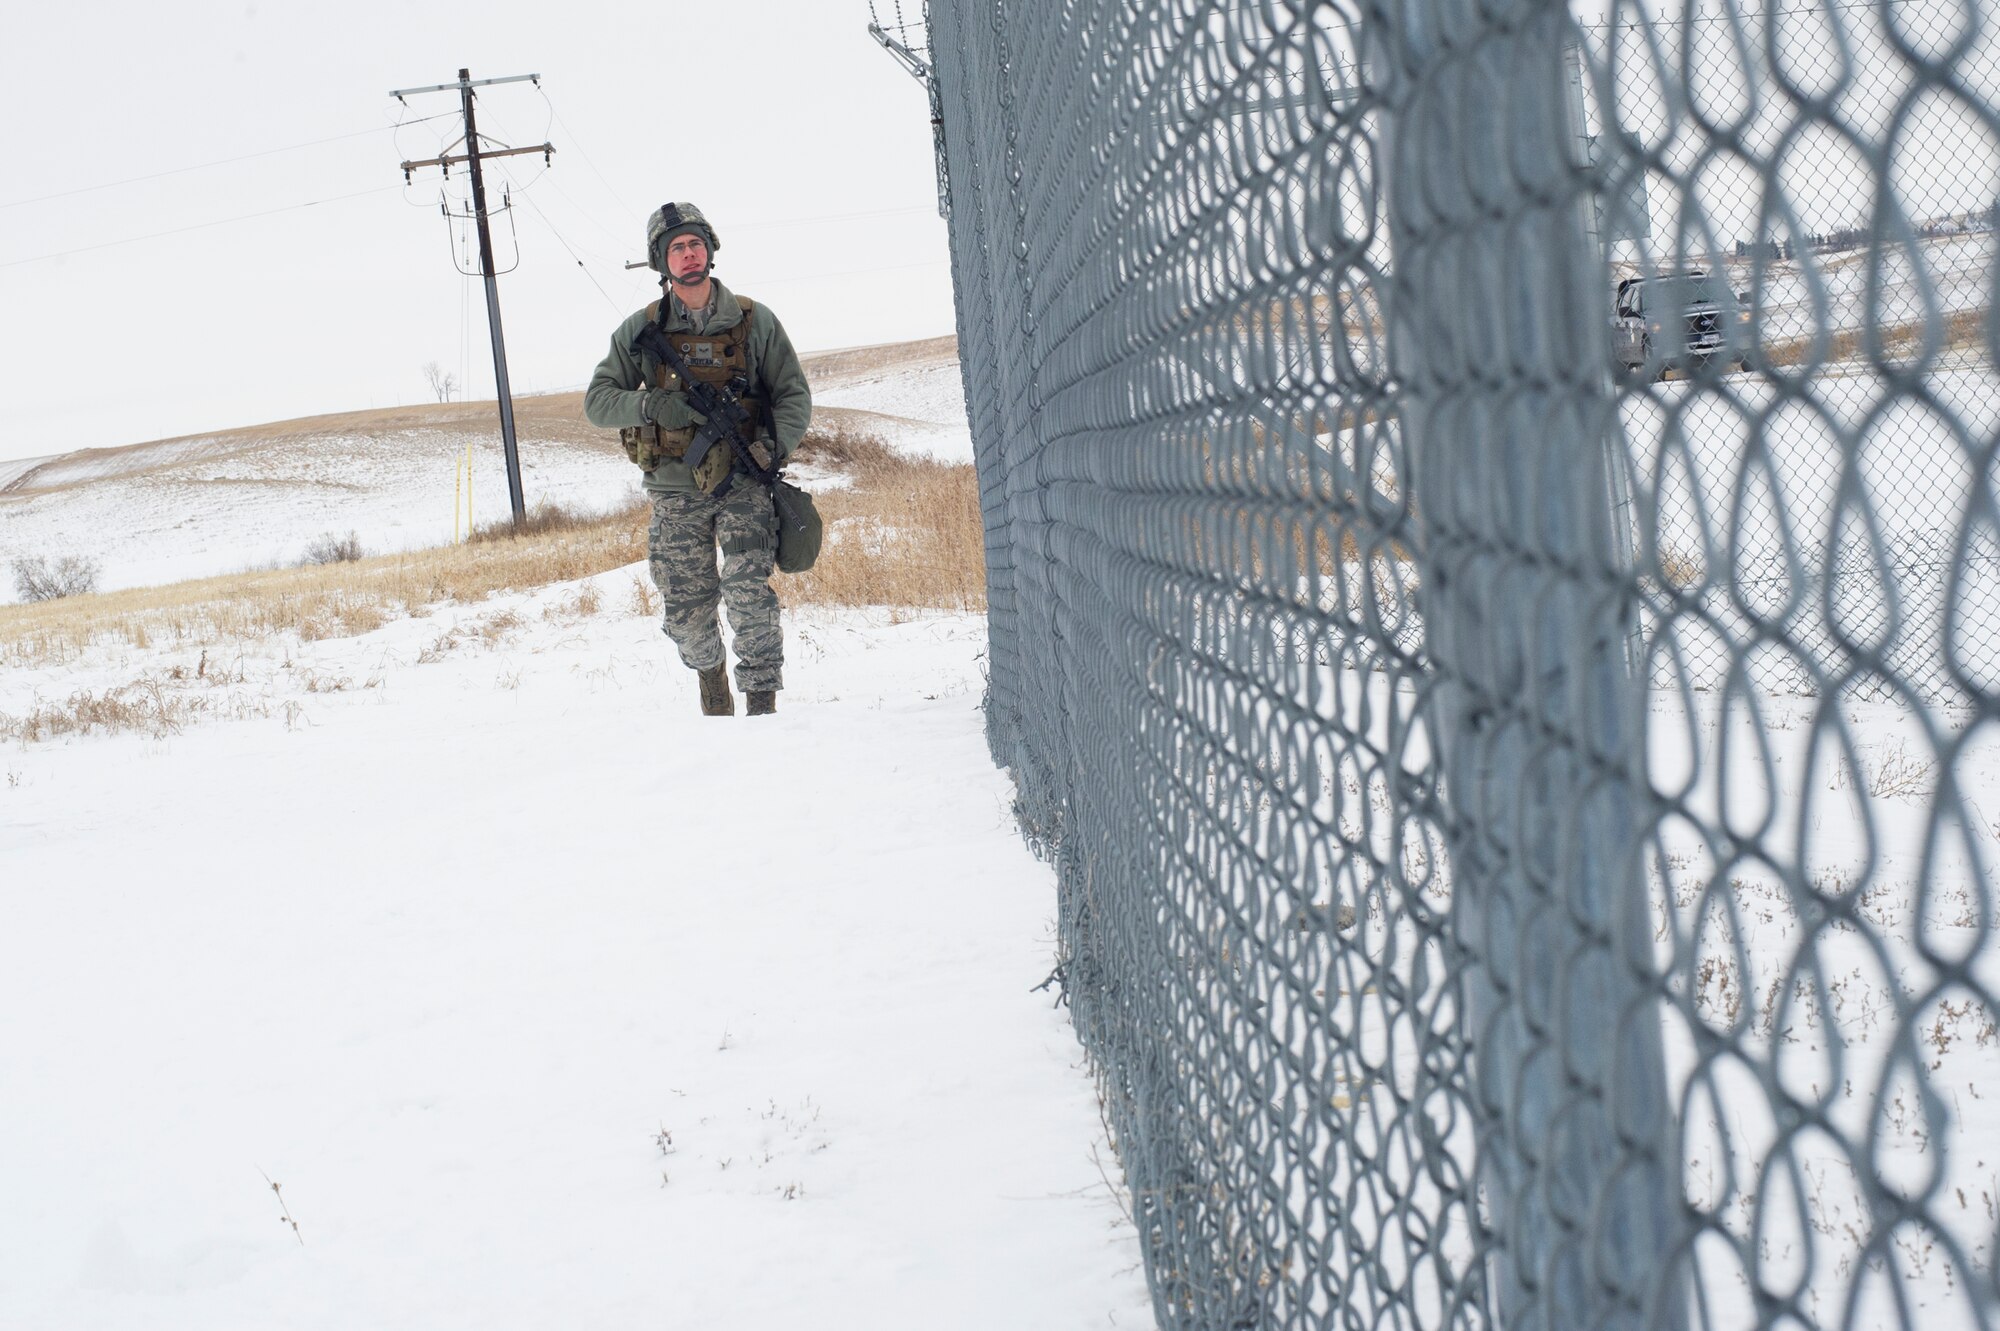 Minot cold weather gear regulations > Minot Air Force Base > Article Display